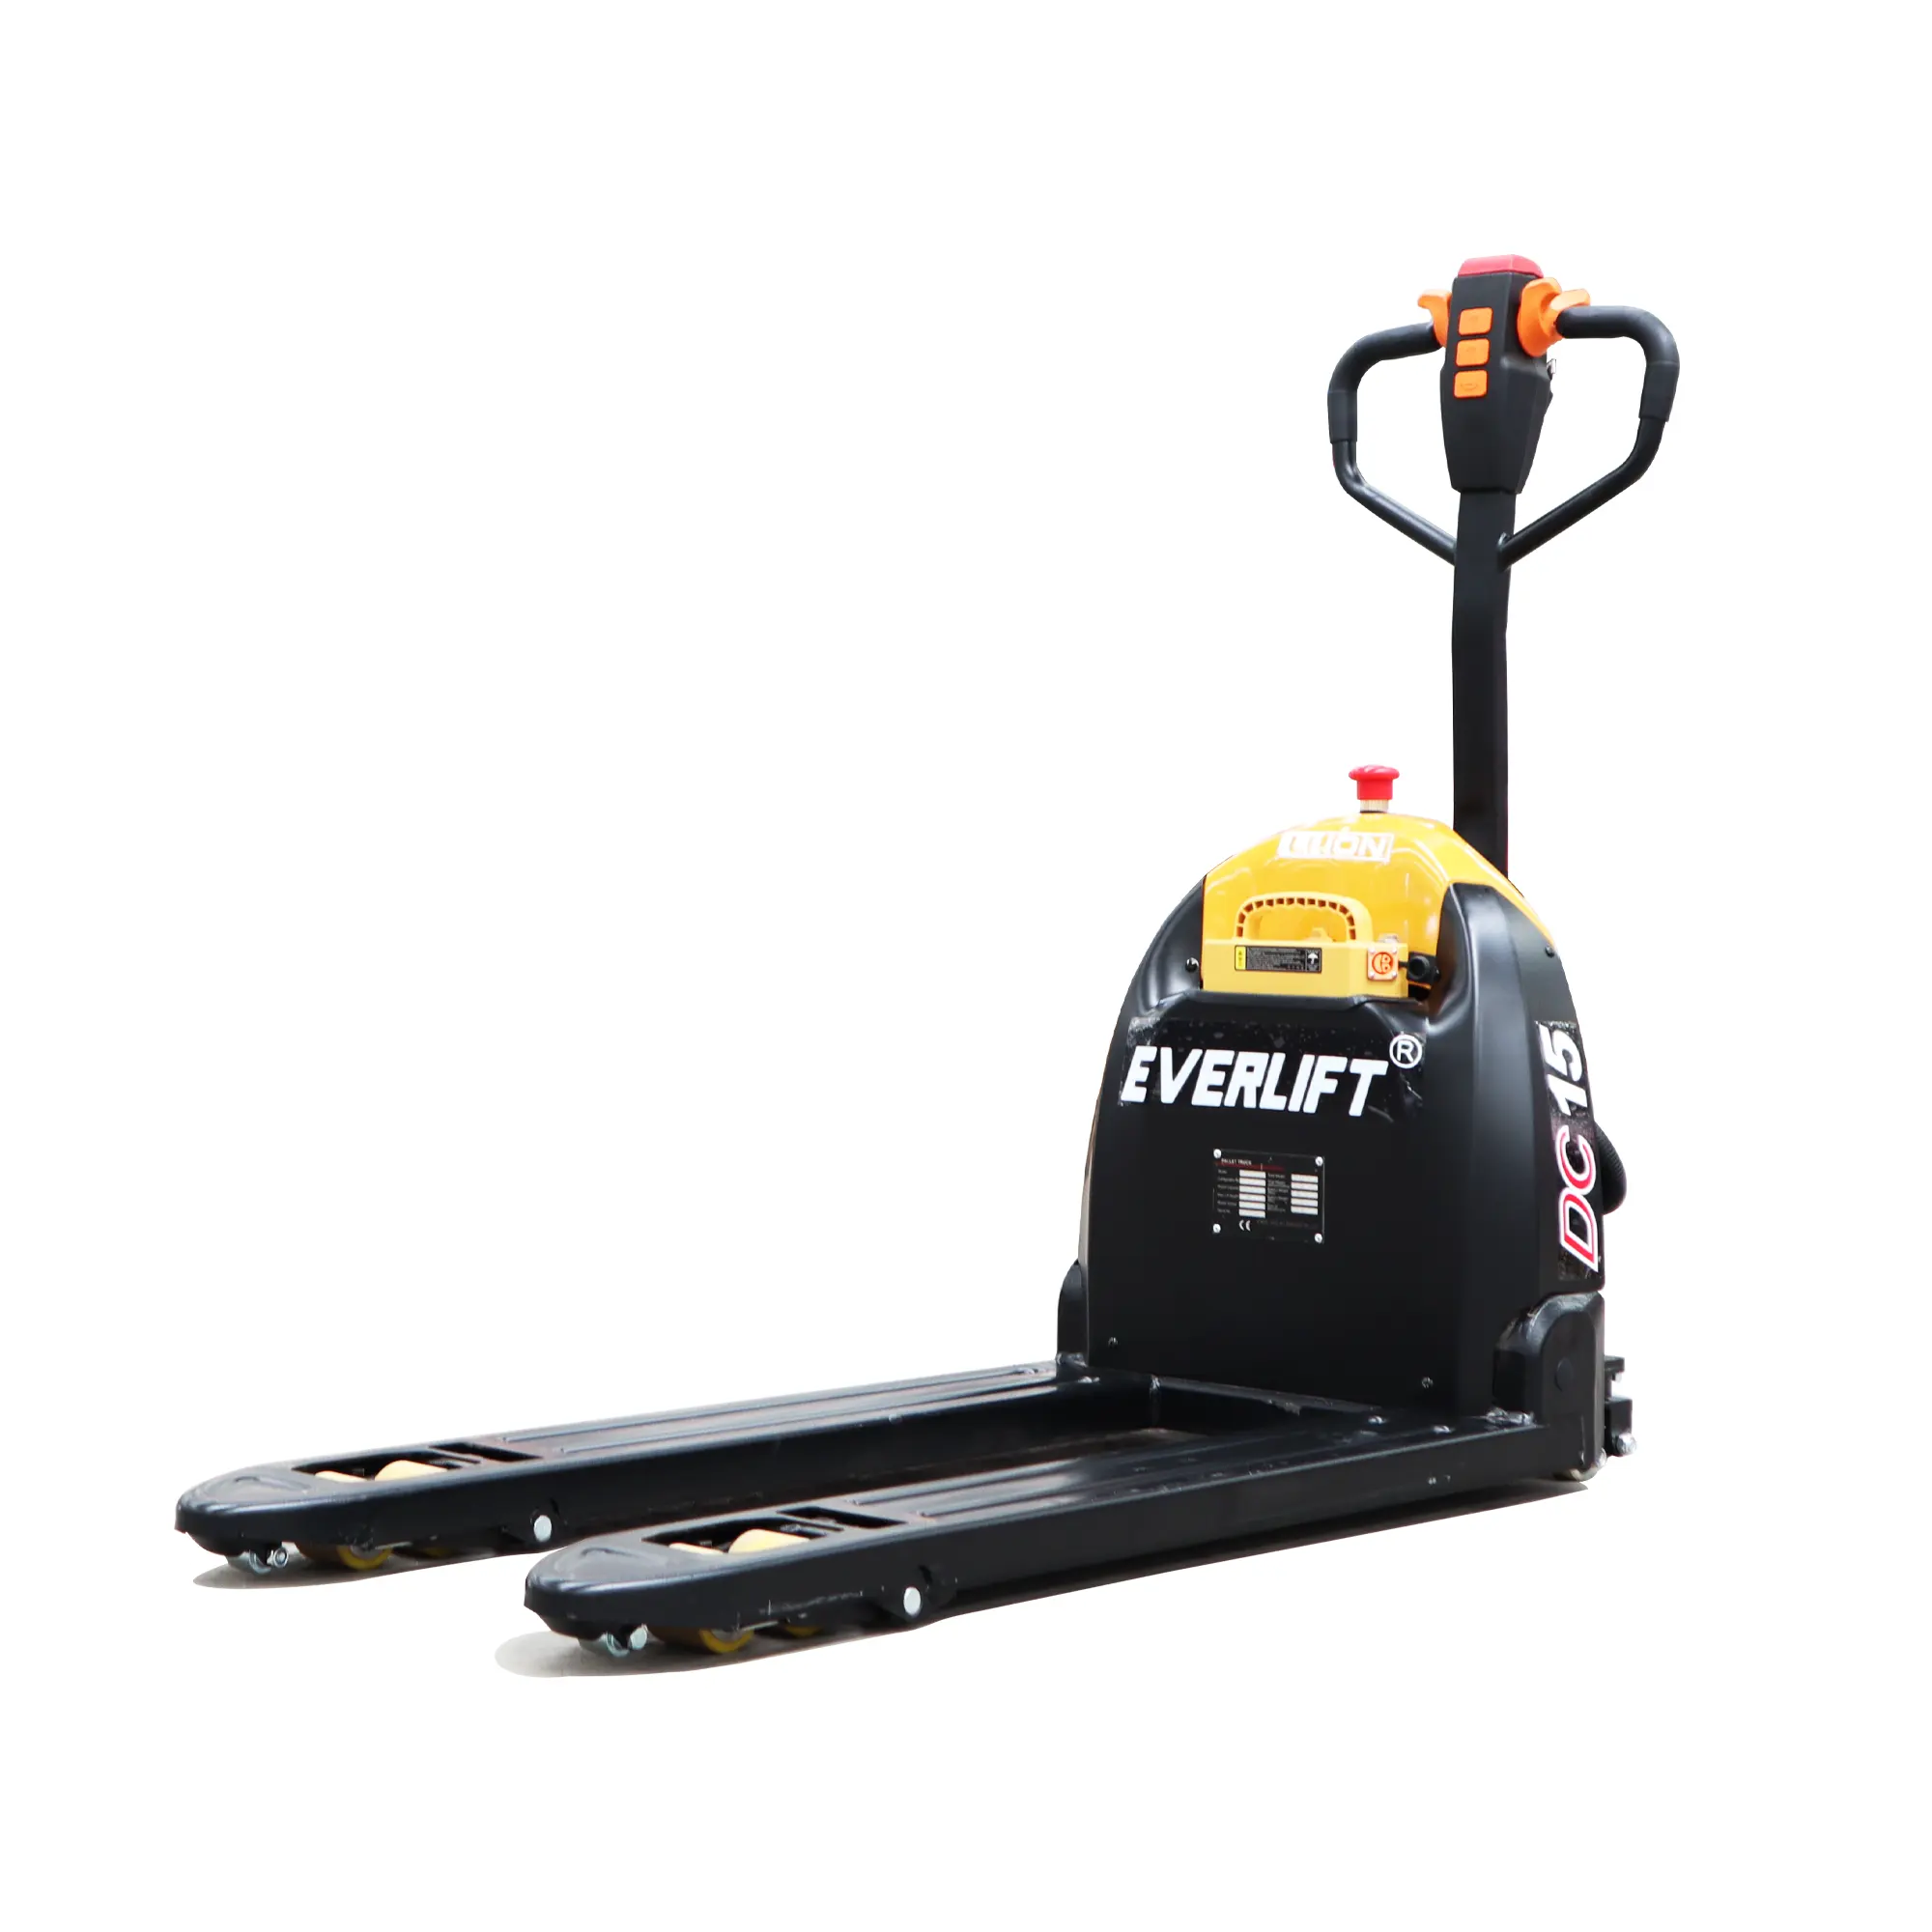 2022 New Popular Electric LIthium Battery Powered Jack 1500kg -2000kg 3309lb-4409lb Capacity Full Electric Pallet Jack For Sale